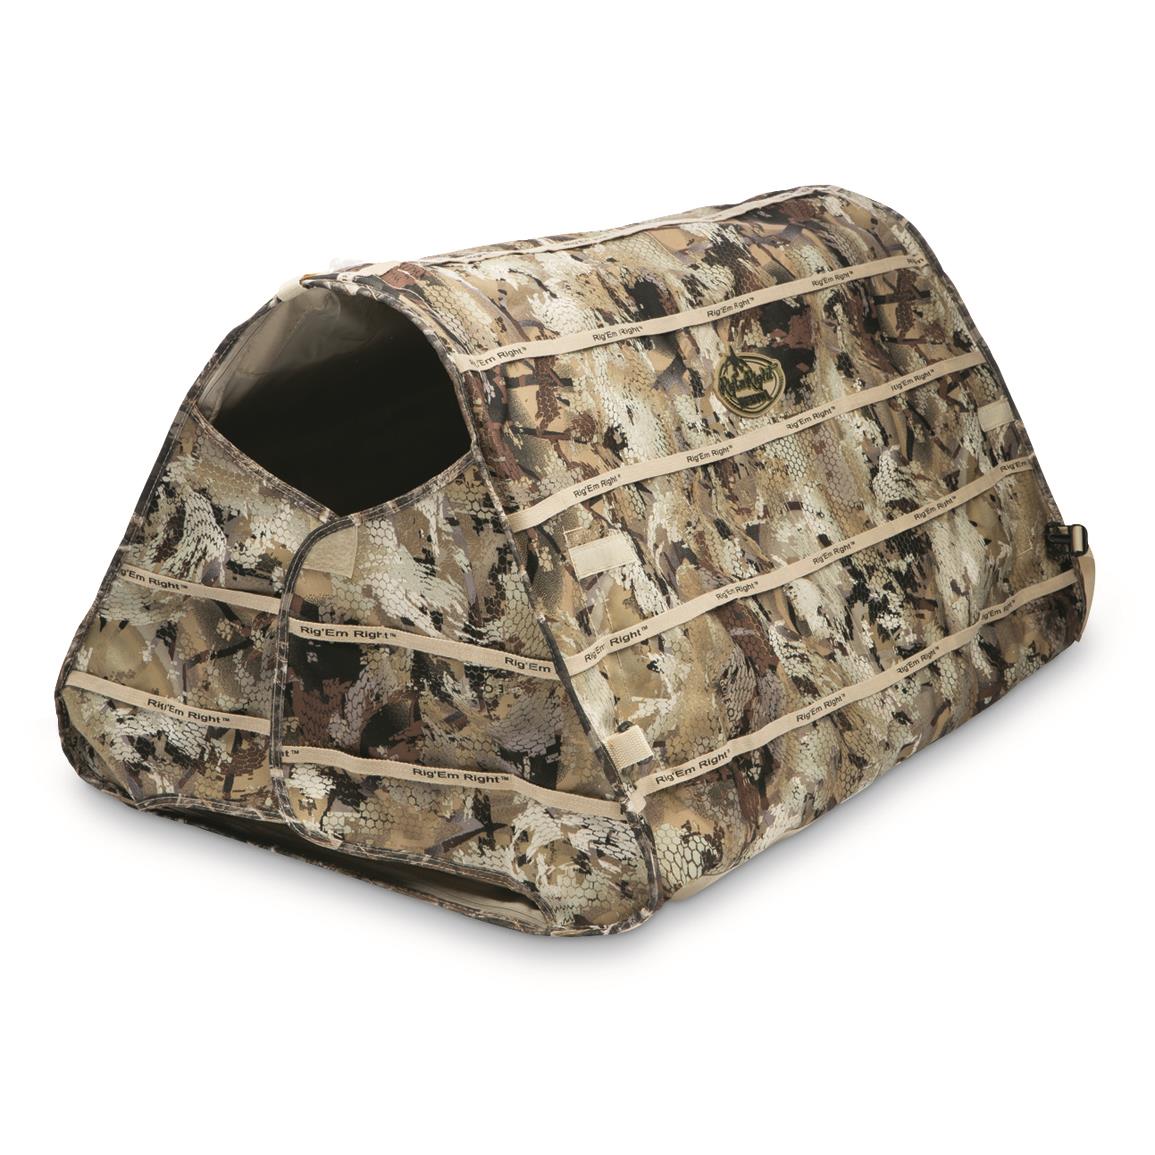 Rig'Em Right Field Bully Dog Blind, GORE OPTIFADE Waterfowl Marsh